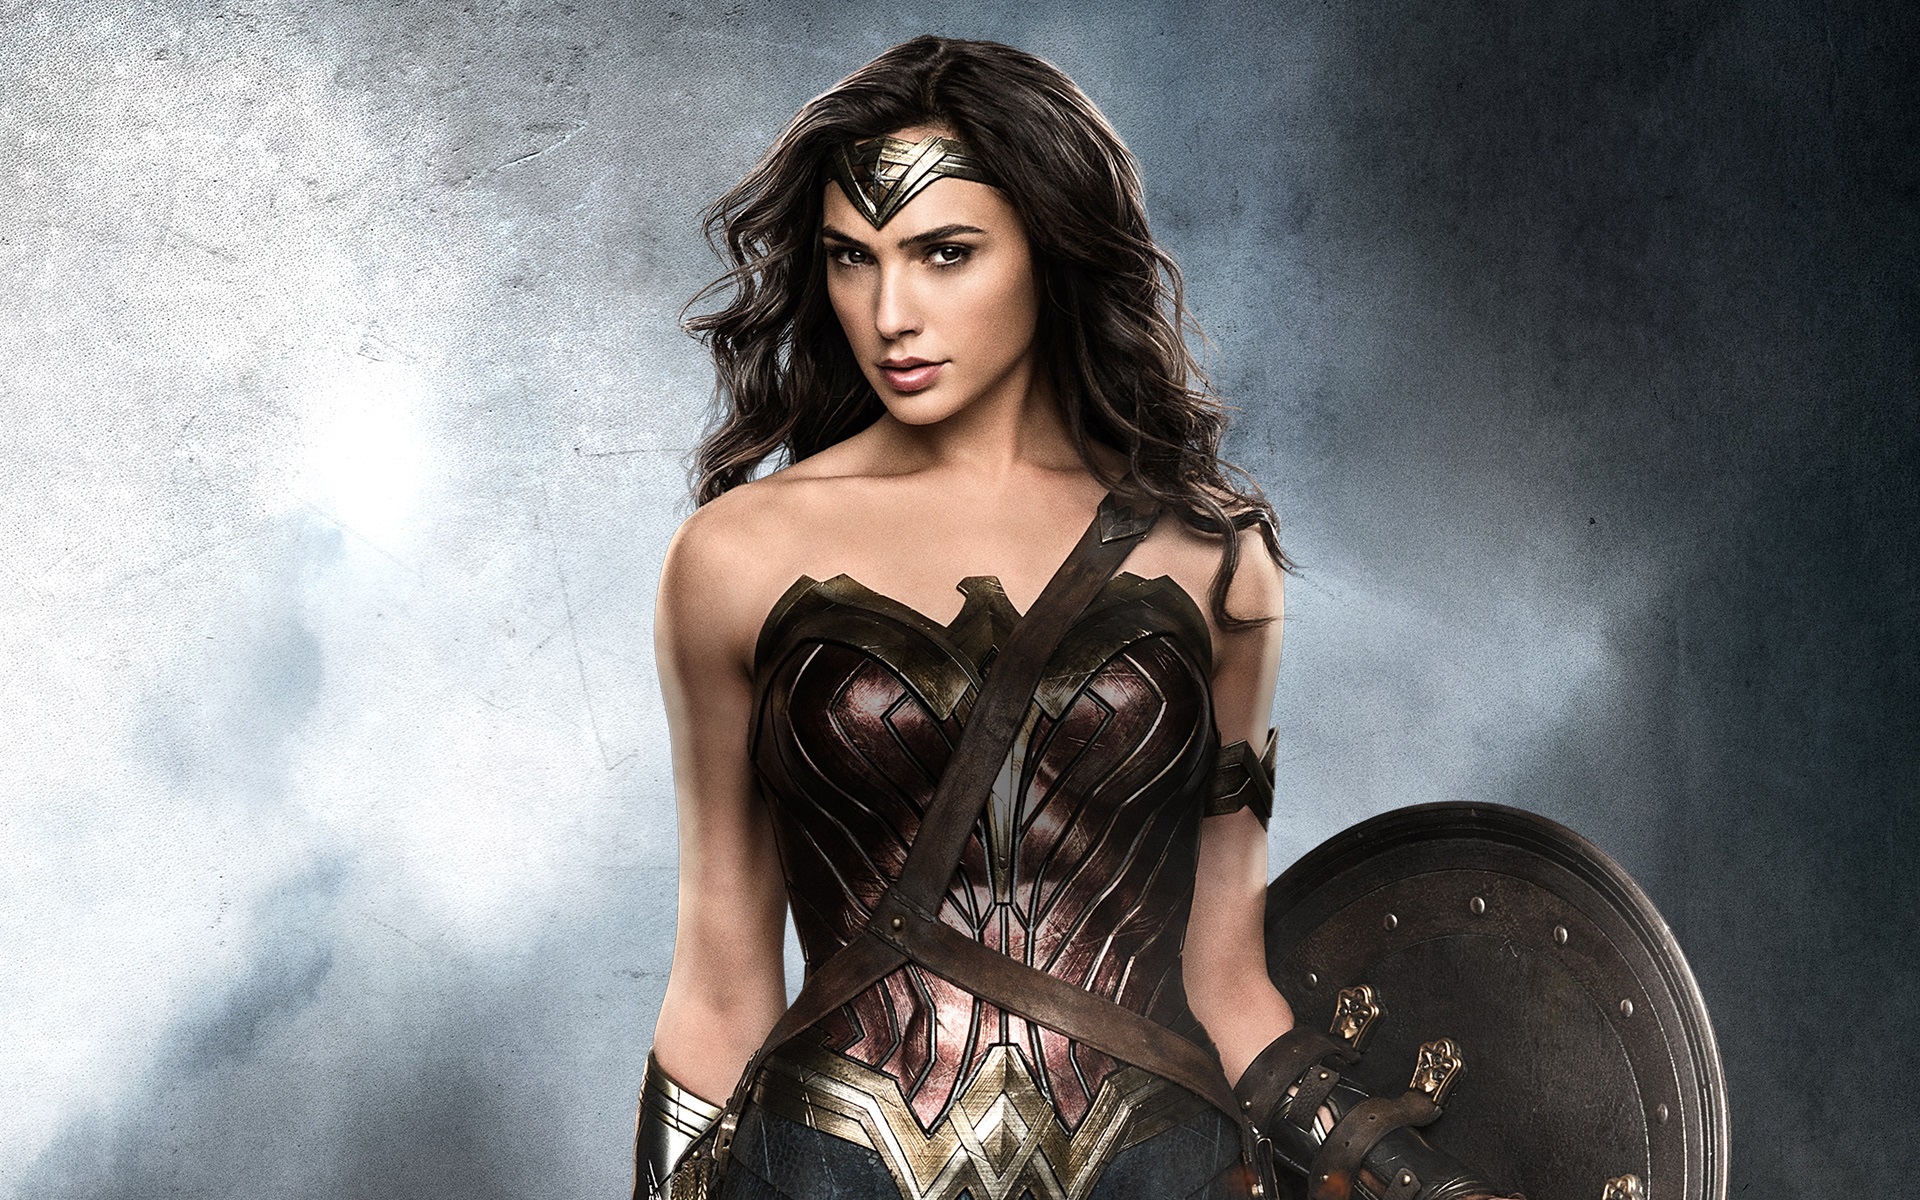 People 1920x1200 Wonder Woman Gal Gadot actress movie characters DC Universe women DC Extended Universe movies shield dark hair red lipstick fantasy girl superheroines